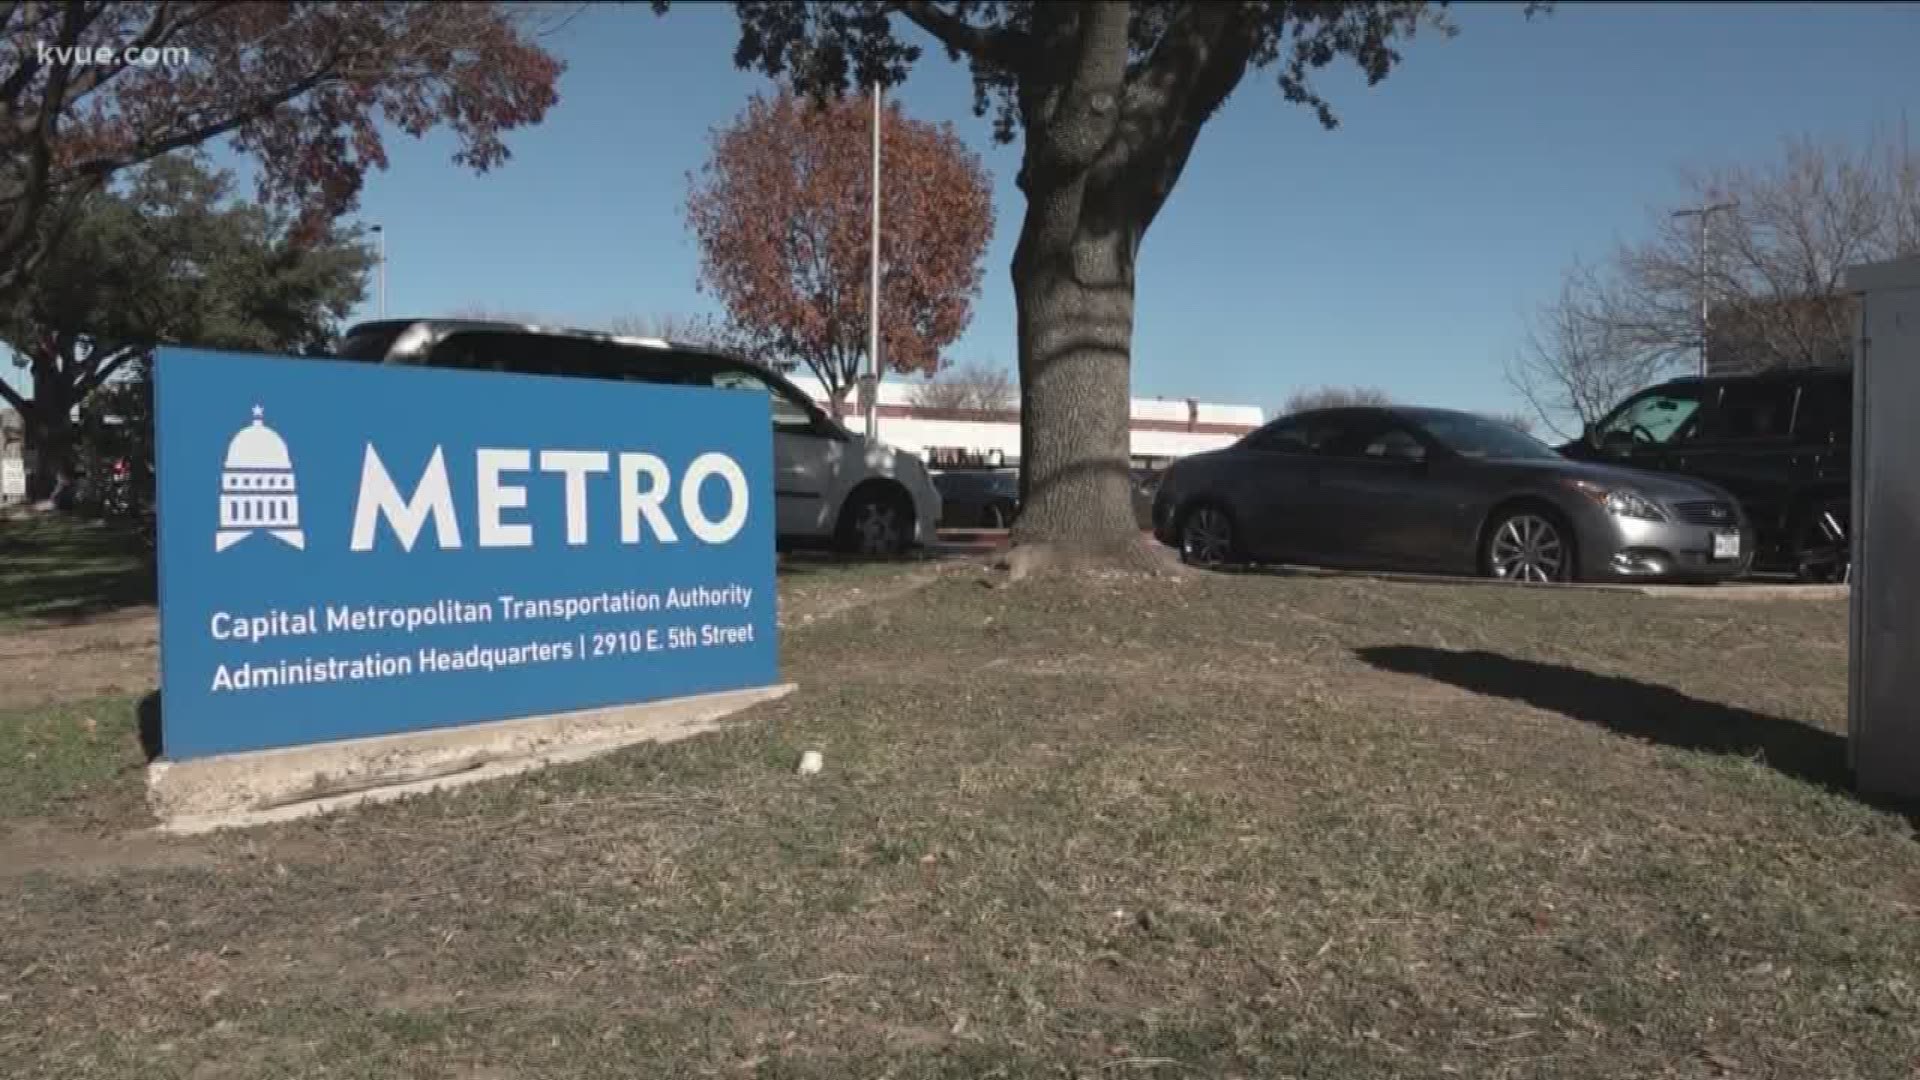 Mari Salazar explains how you can catch a free ride with CapMetro on New Year's Eve.